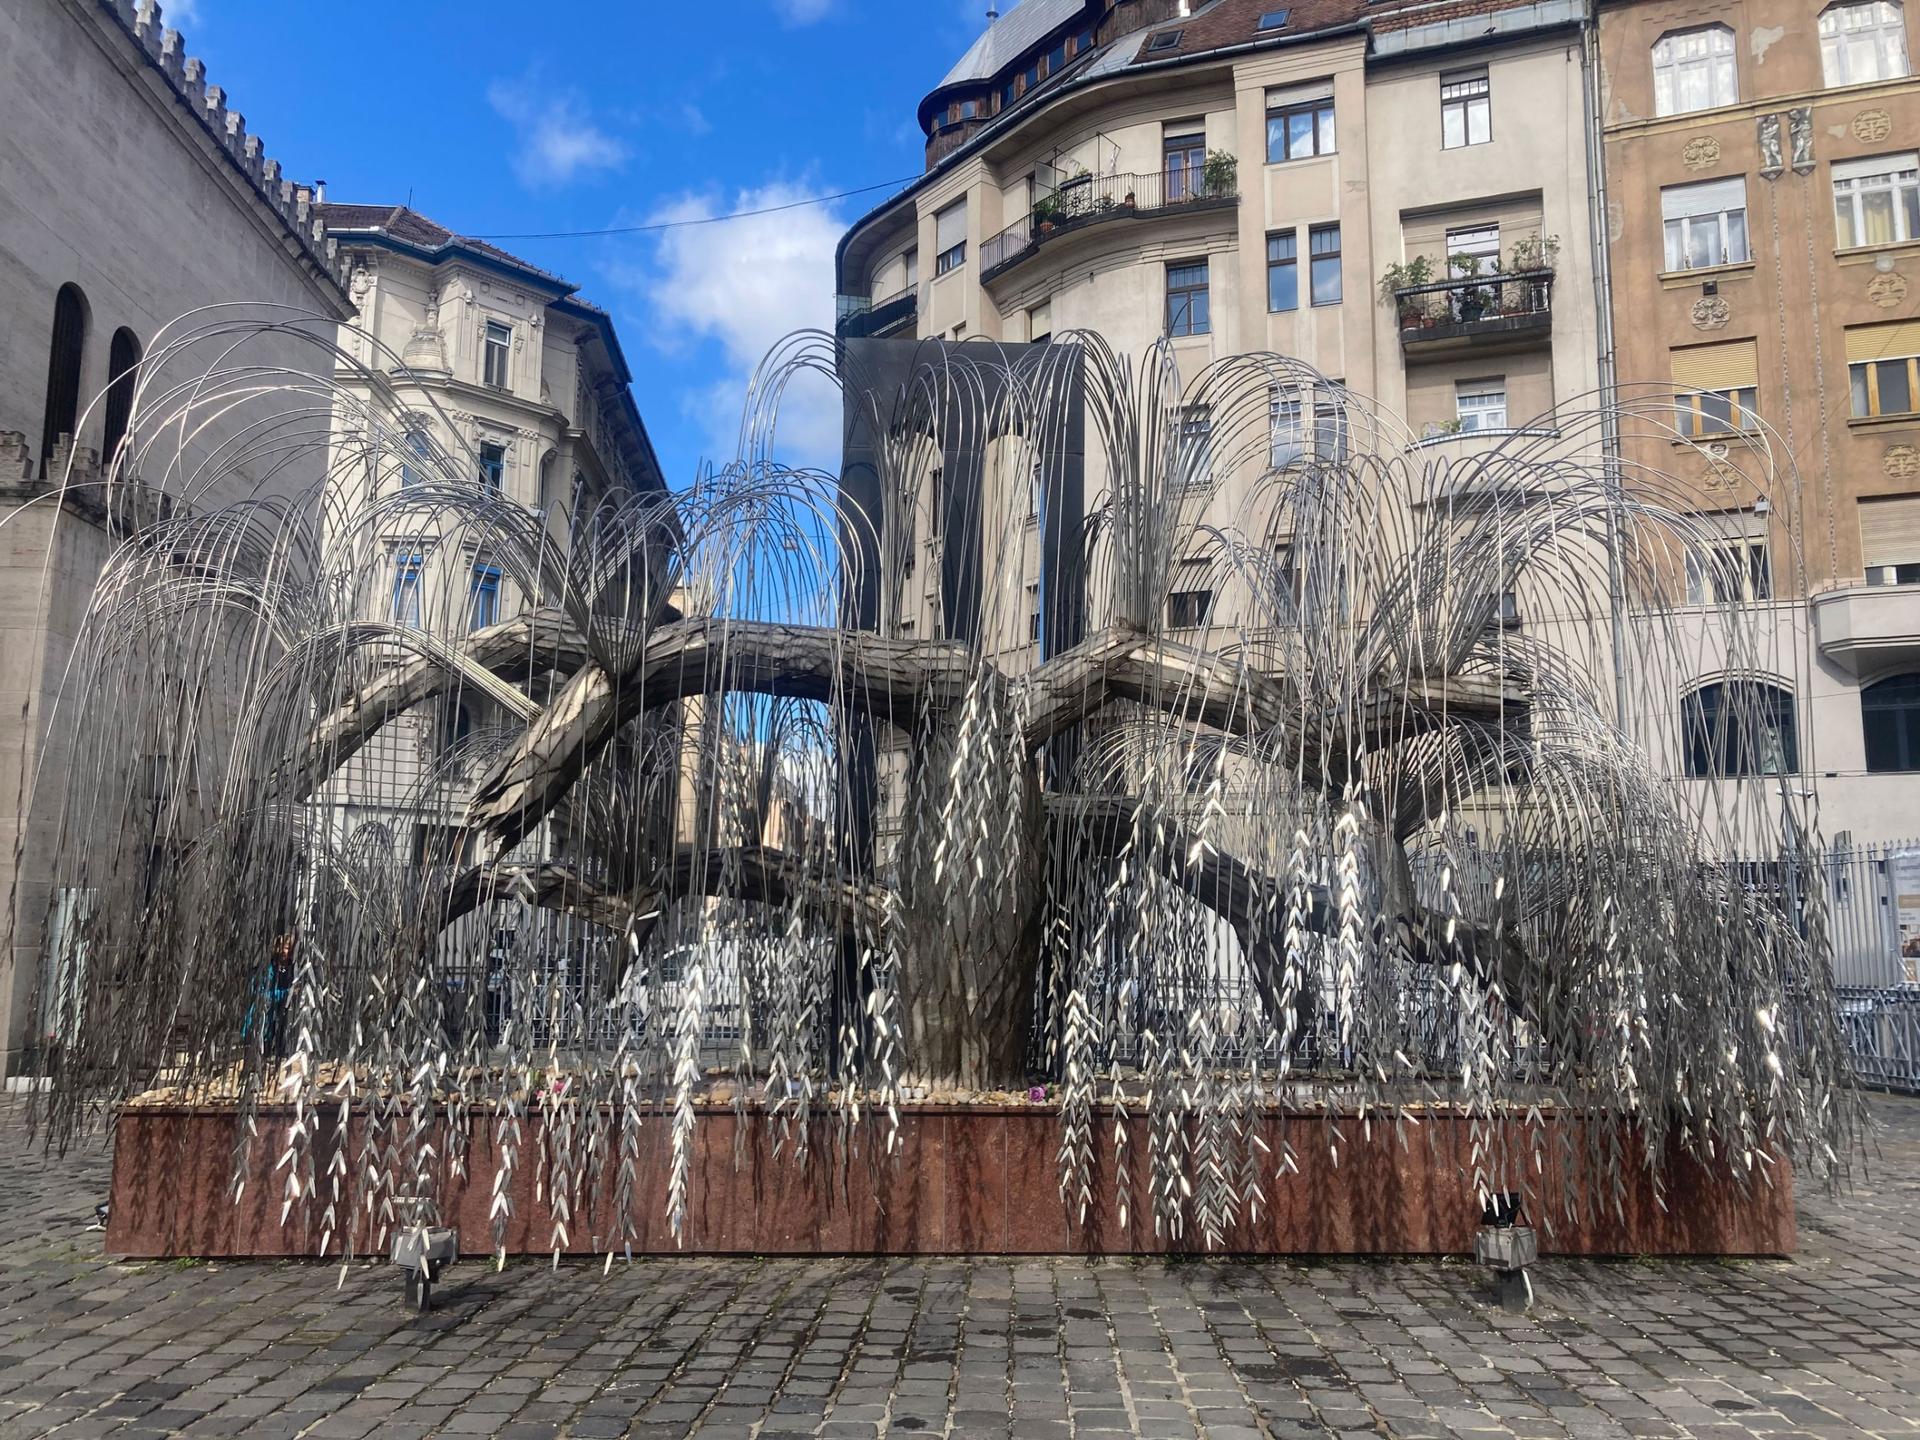 Sculpture of a weeping willow tree in Raol Wallenberg Holocaust Memorial Park at The Great Synagogue, Dohány Street, Budapest, Hungary.